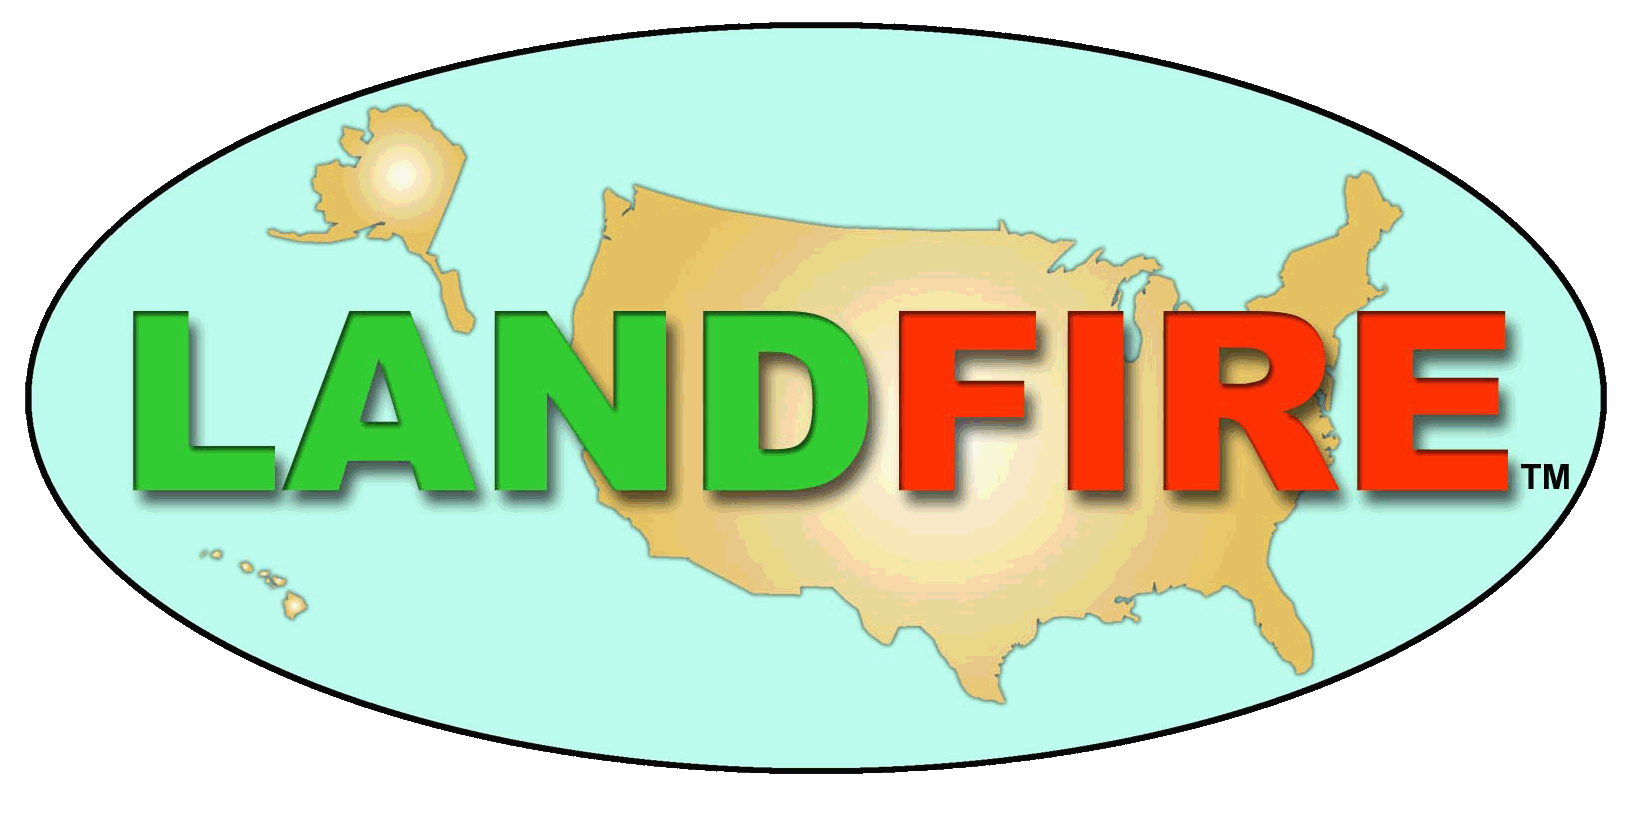 LANDFIRE - multi-partner wildland fire, ecosystem, and wildland fuel mapping project